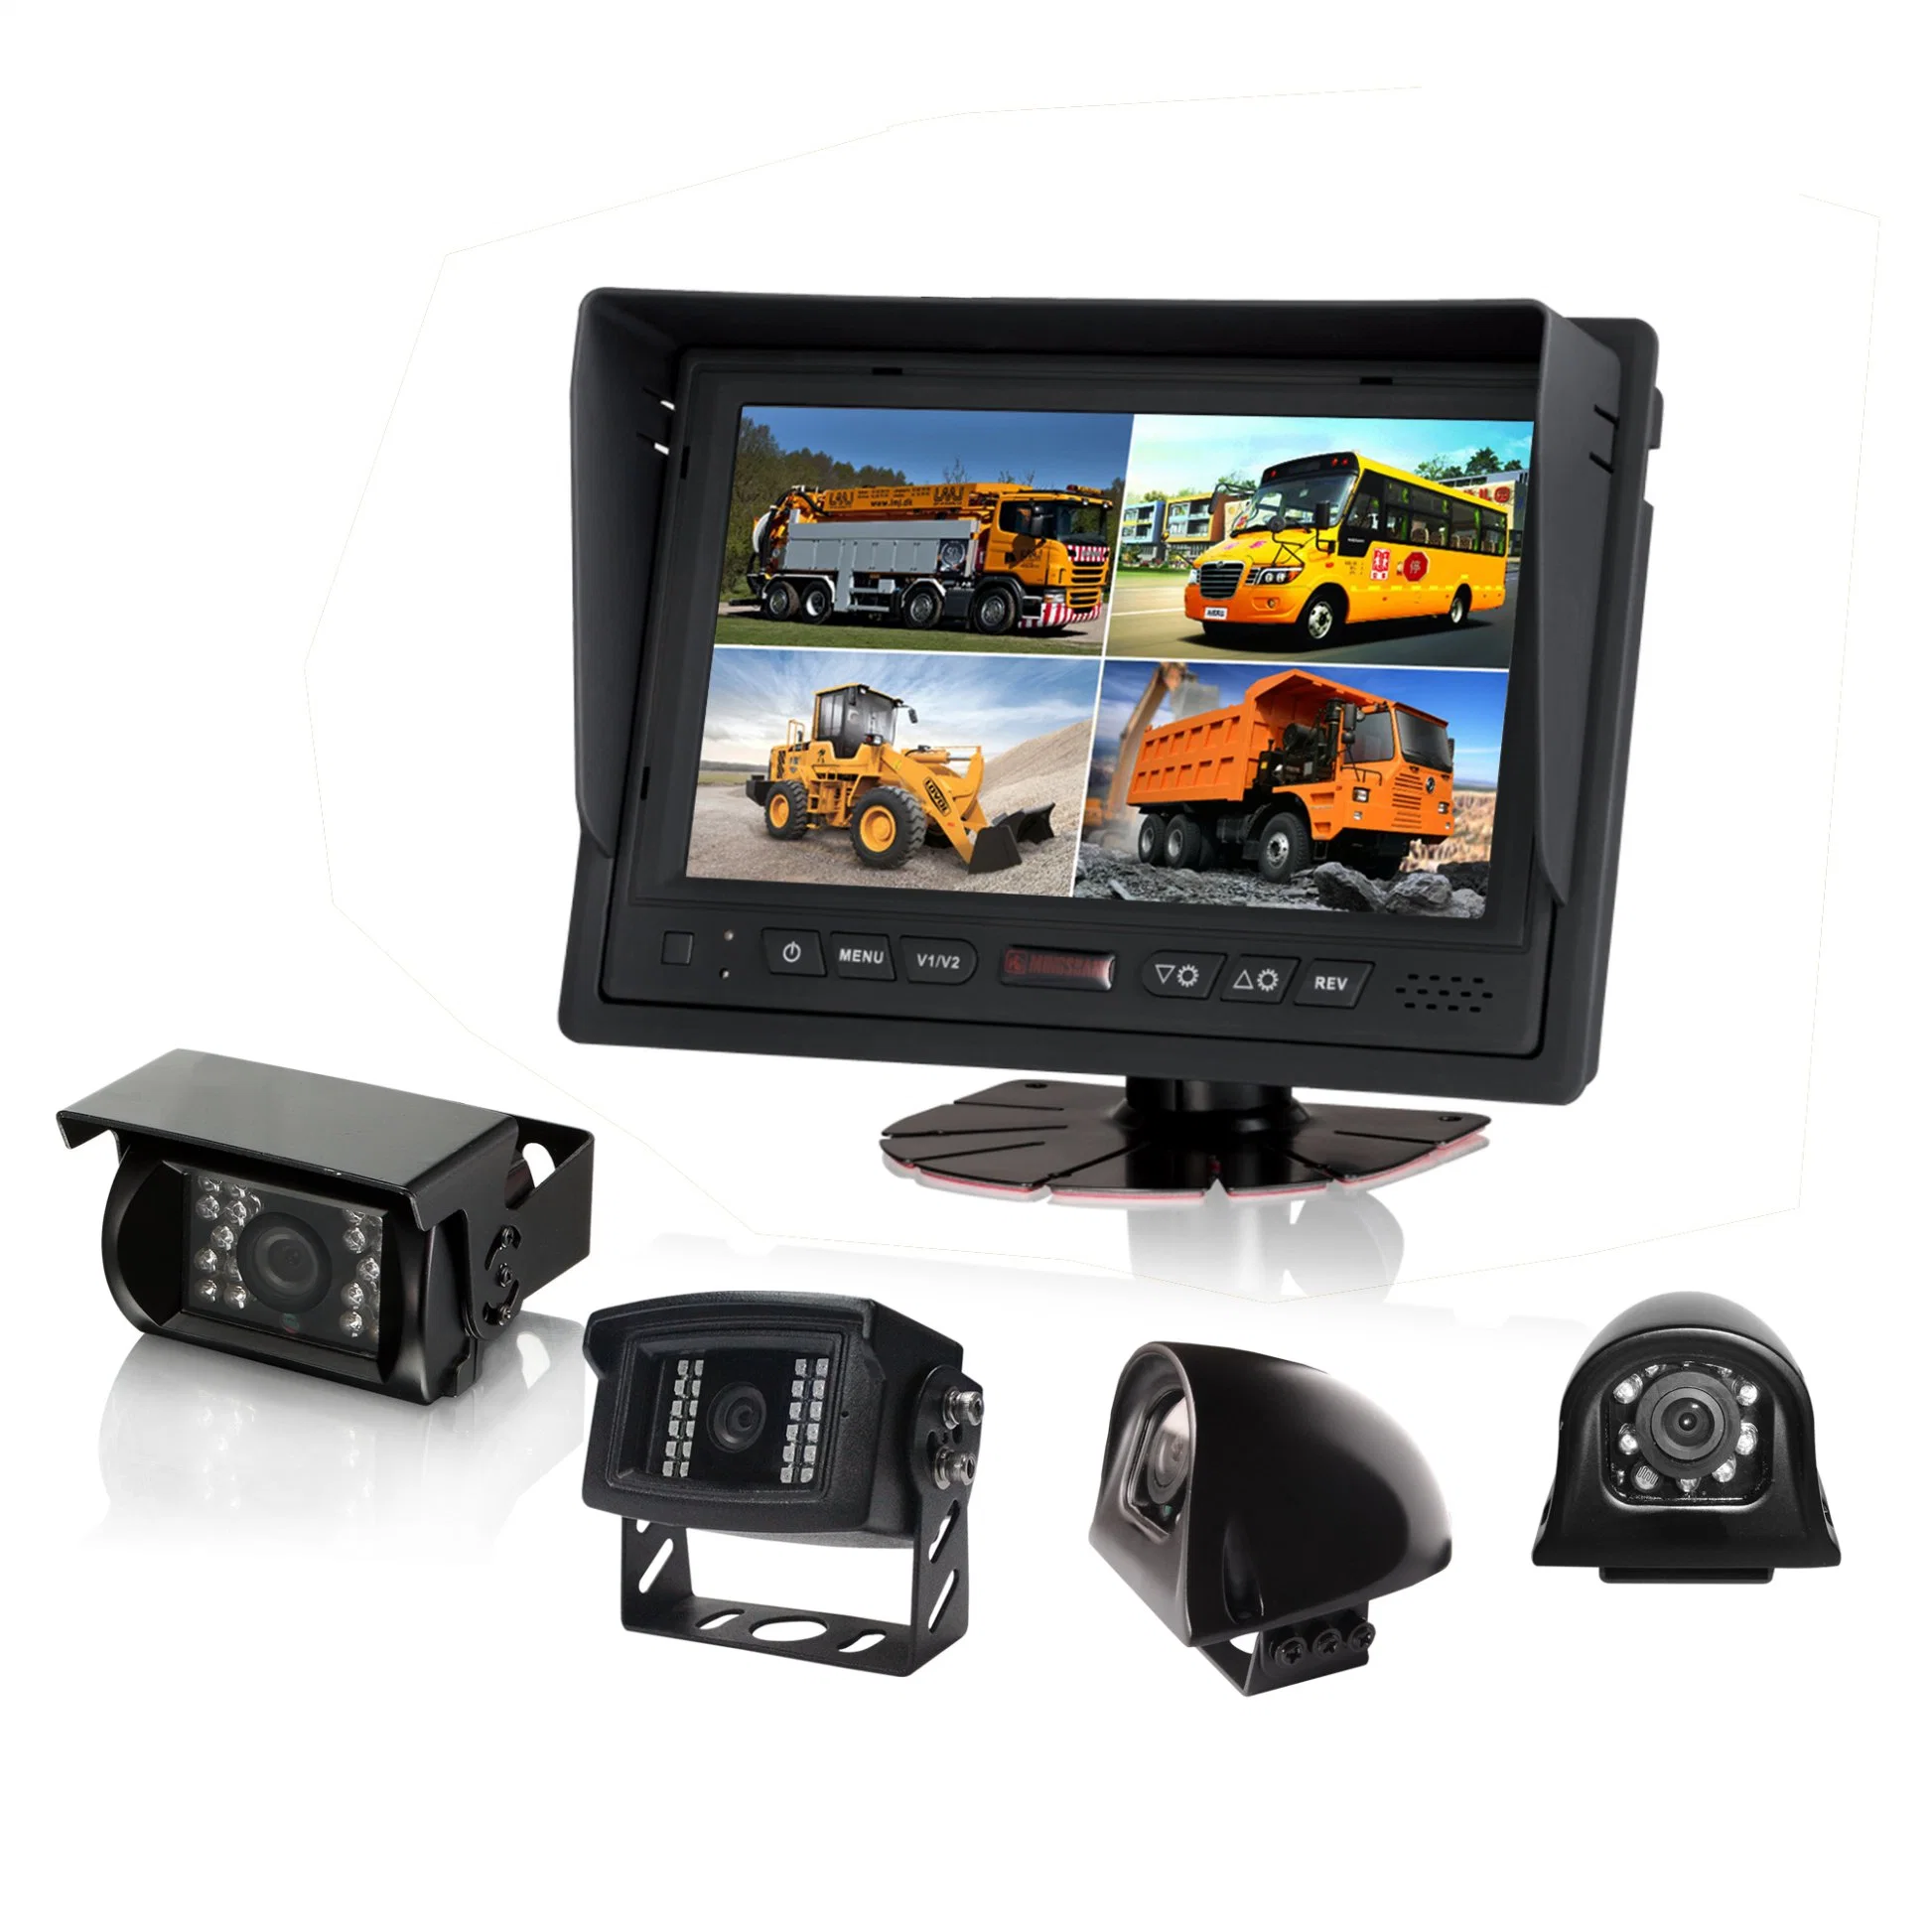 5.6-Inch Car Rearview Monitor for Truck Security System